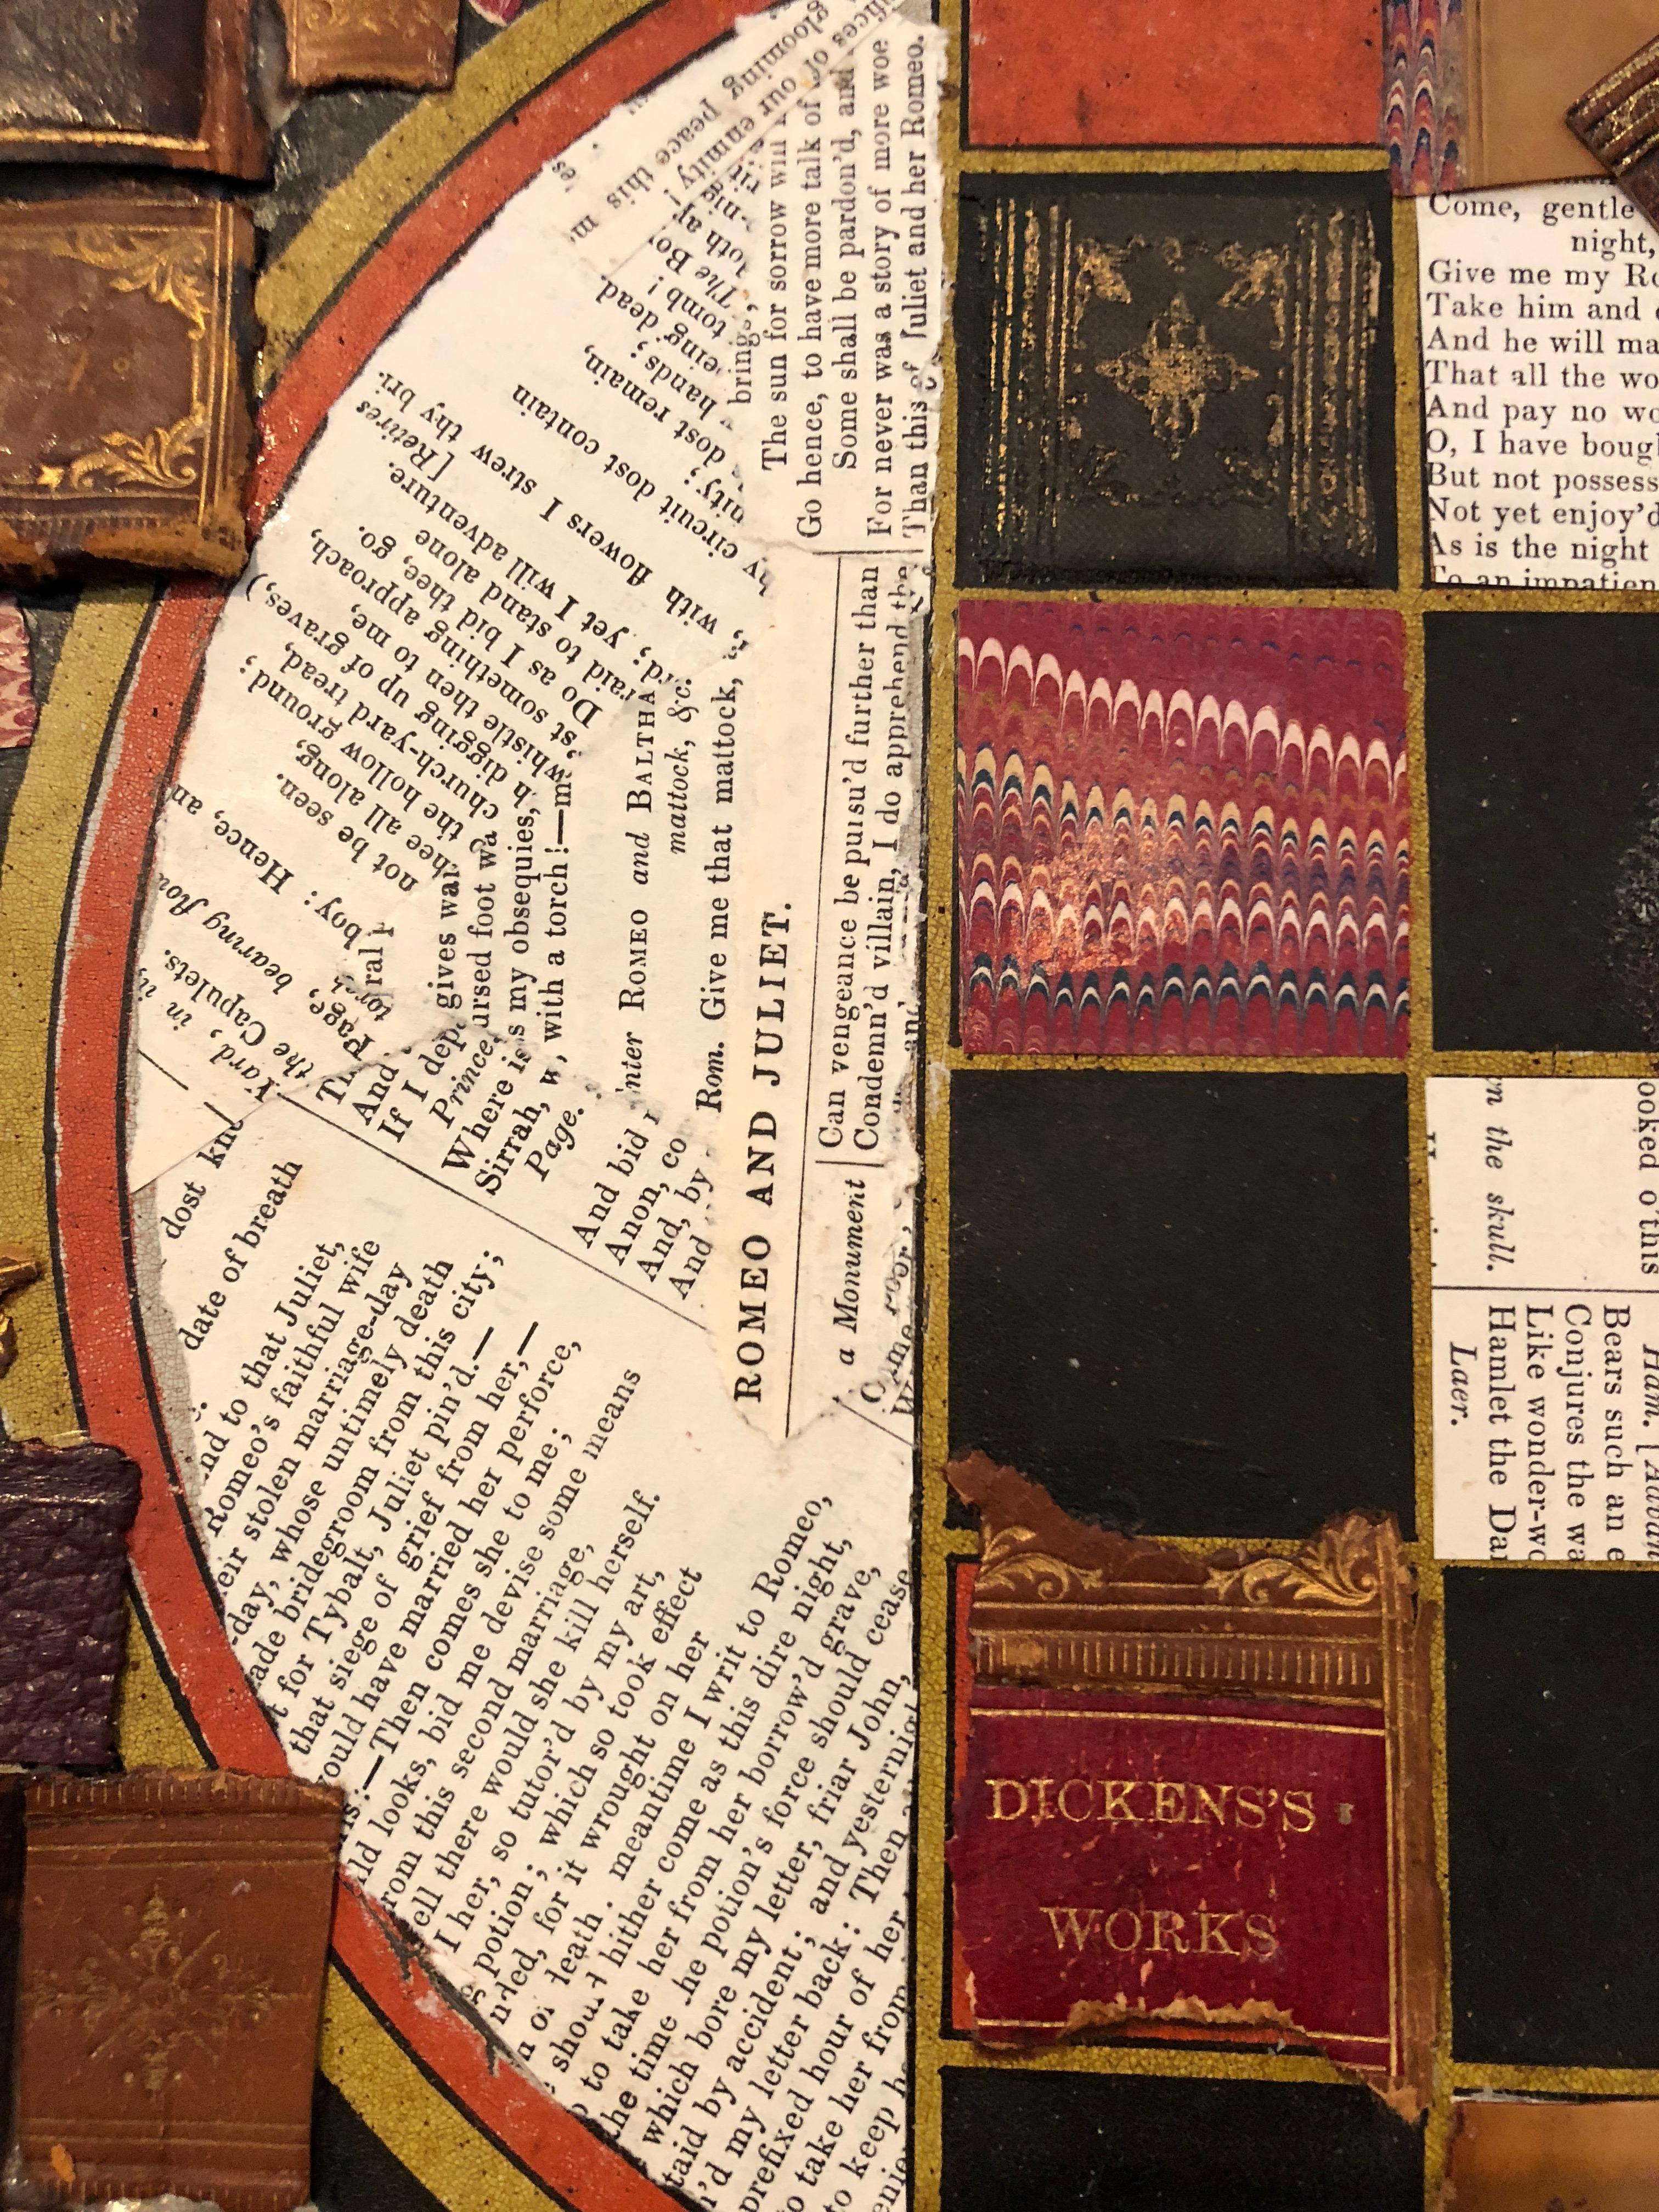 Richly layered collage on a vintage tin game board having a masculine combination of leather book bindings, text from Shakespeare plays, and decorative paper, with a warm earth color palette of black, cream, orange, brown and maroon.
By Princeton